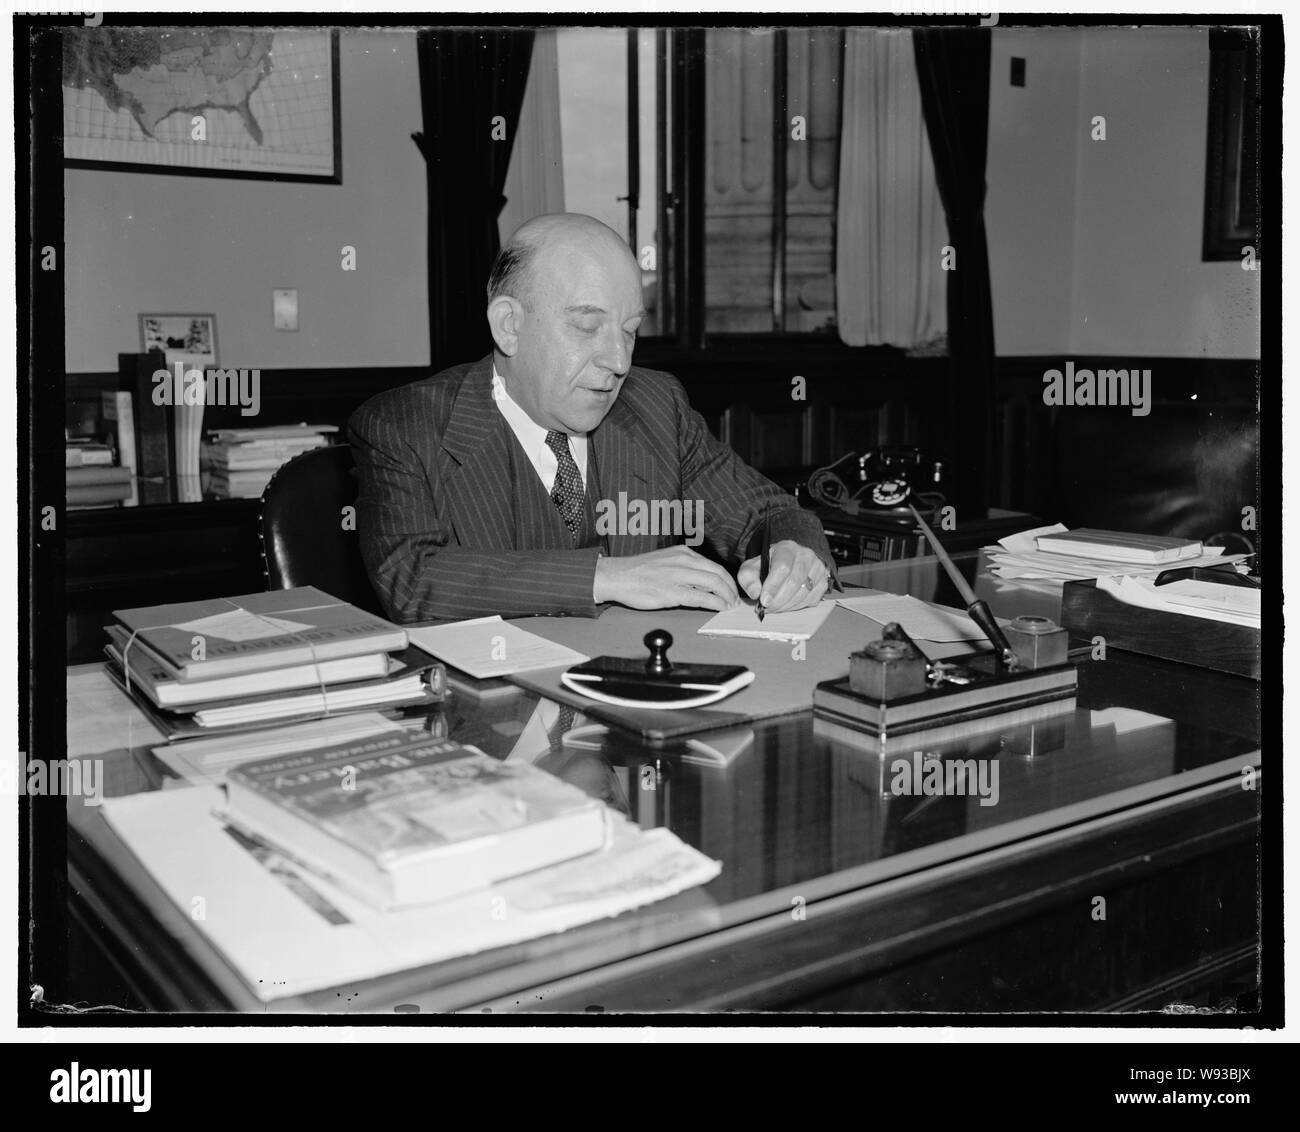 A.A.A. Administrator. Washington, D.C., Sept. 22. A new and informal picture of H.R. Tolley, Administrator of the Agriculture Adjustment Administration, 9/22/38 Stock Photo